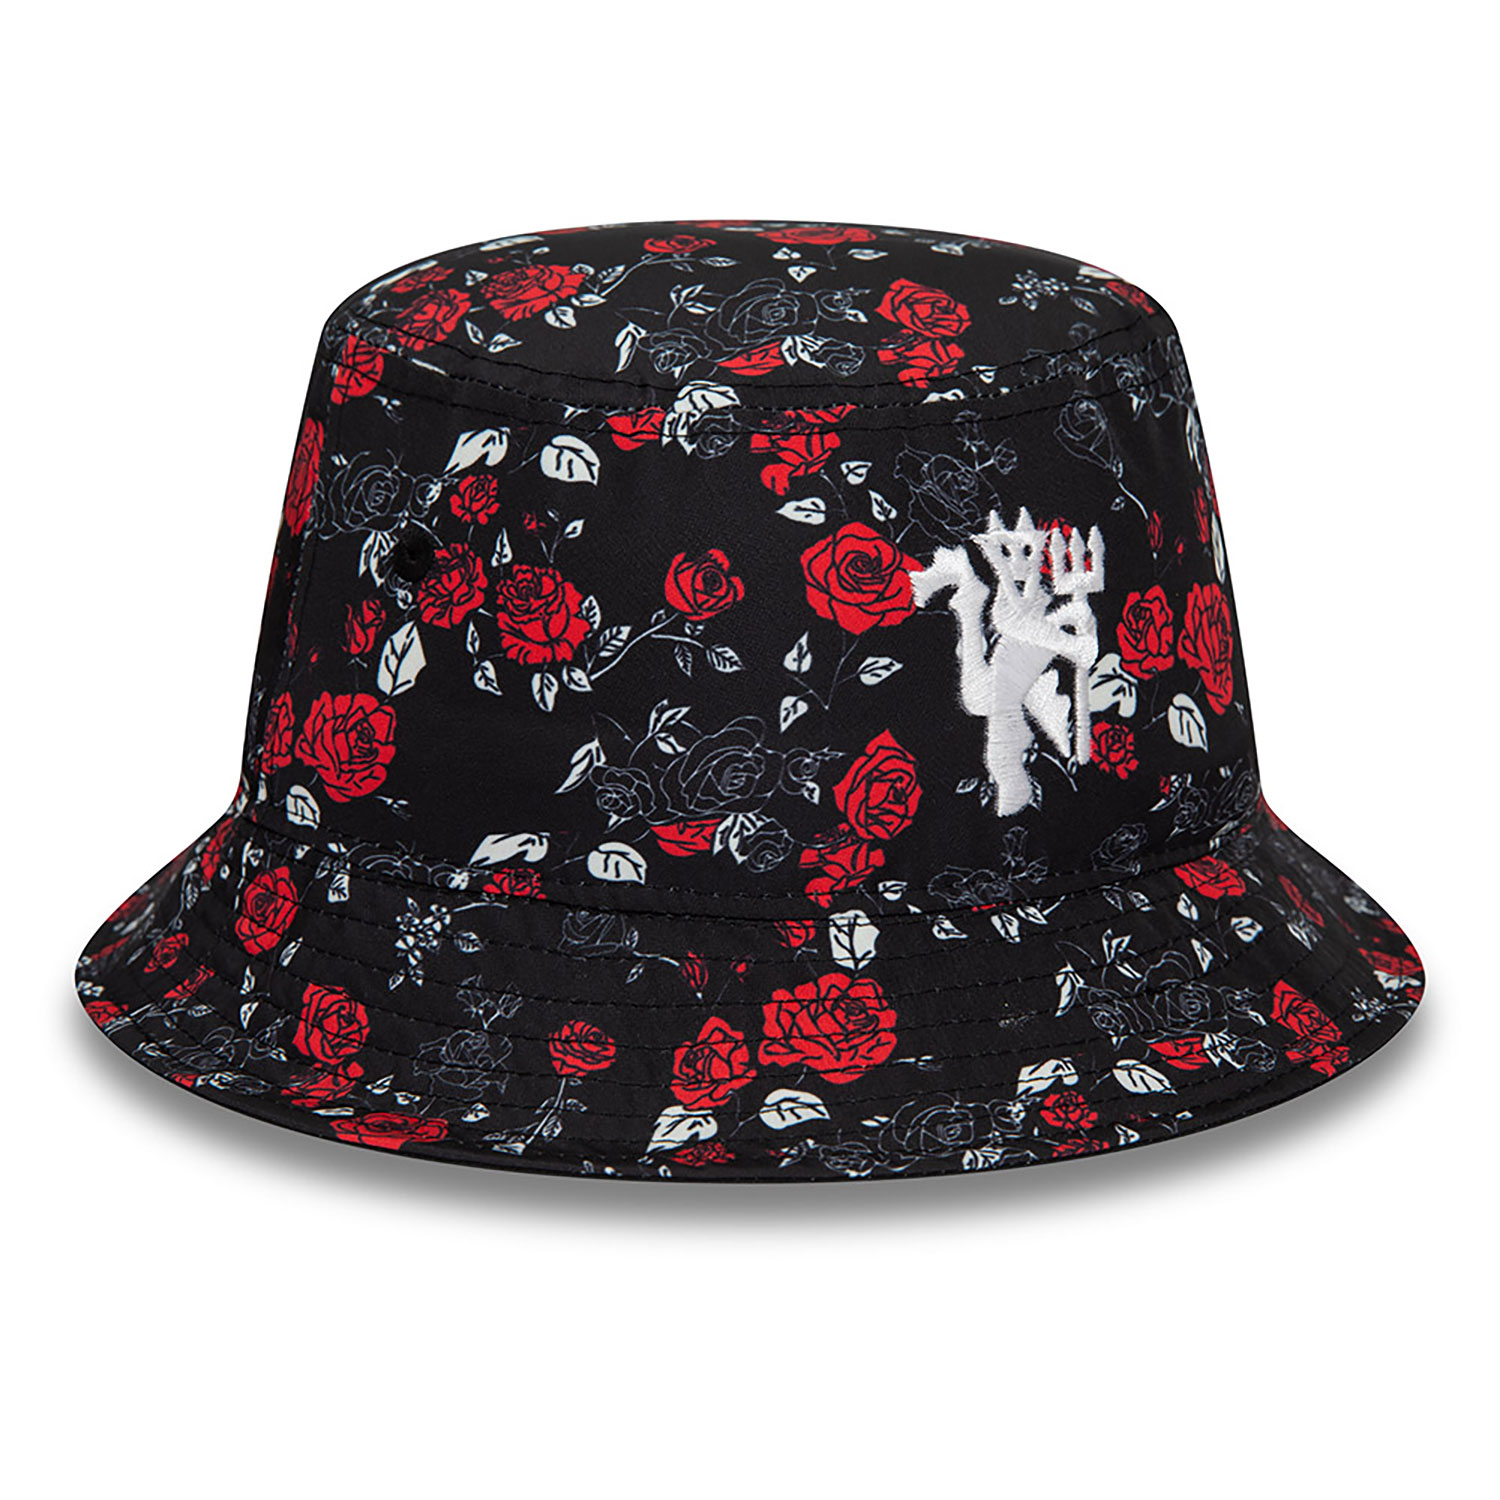 Manchester United FC Floral All Over Print Black Bucket Hat